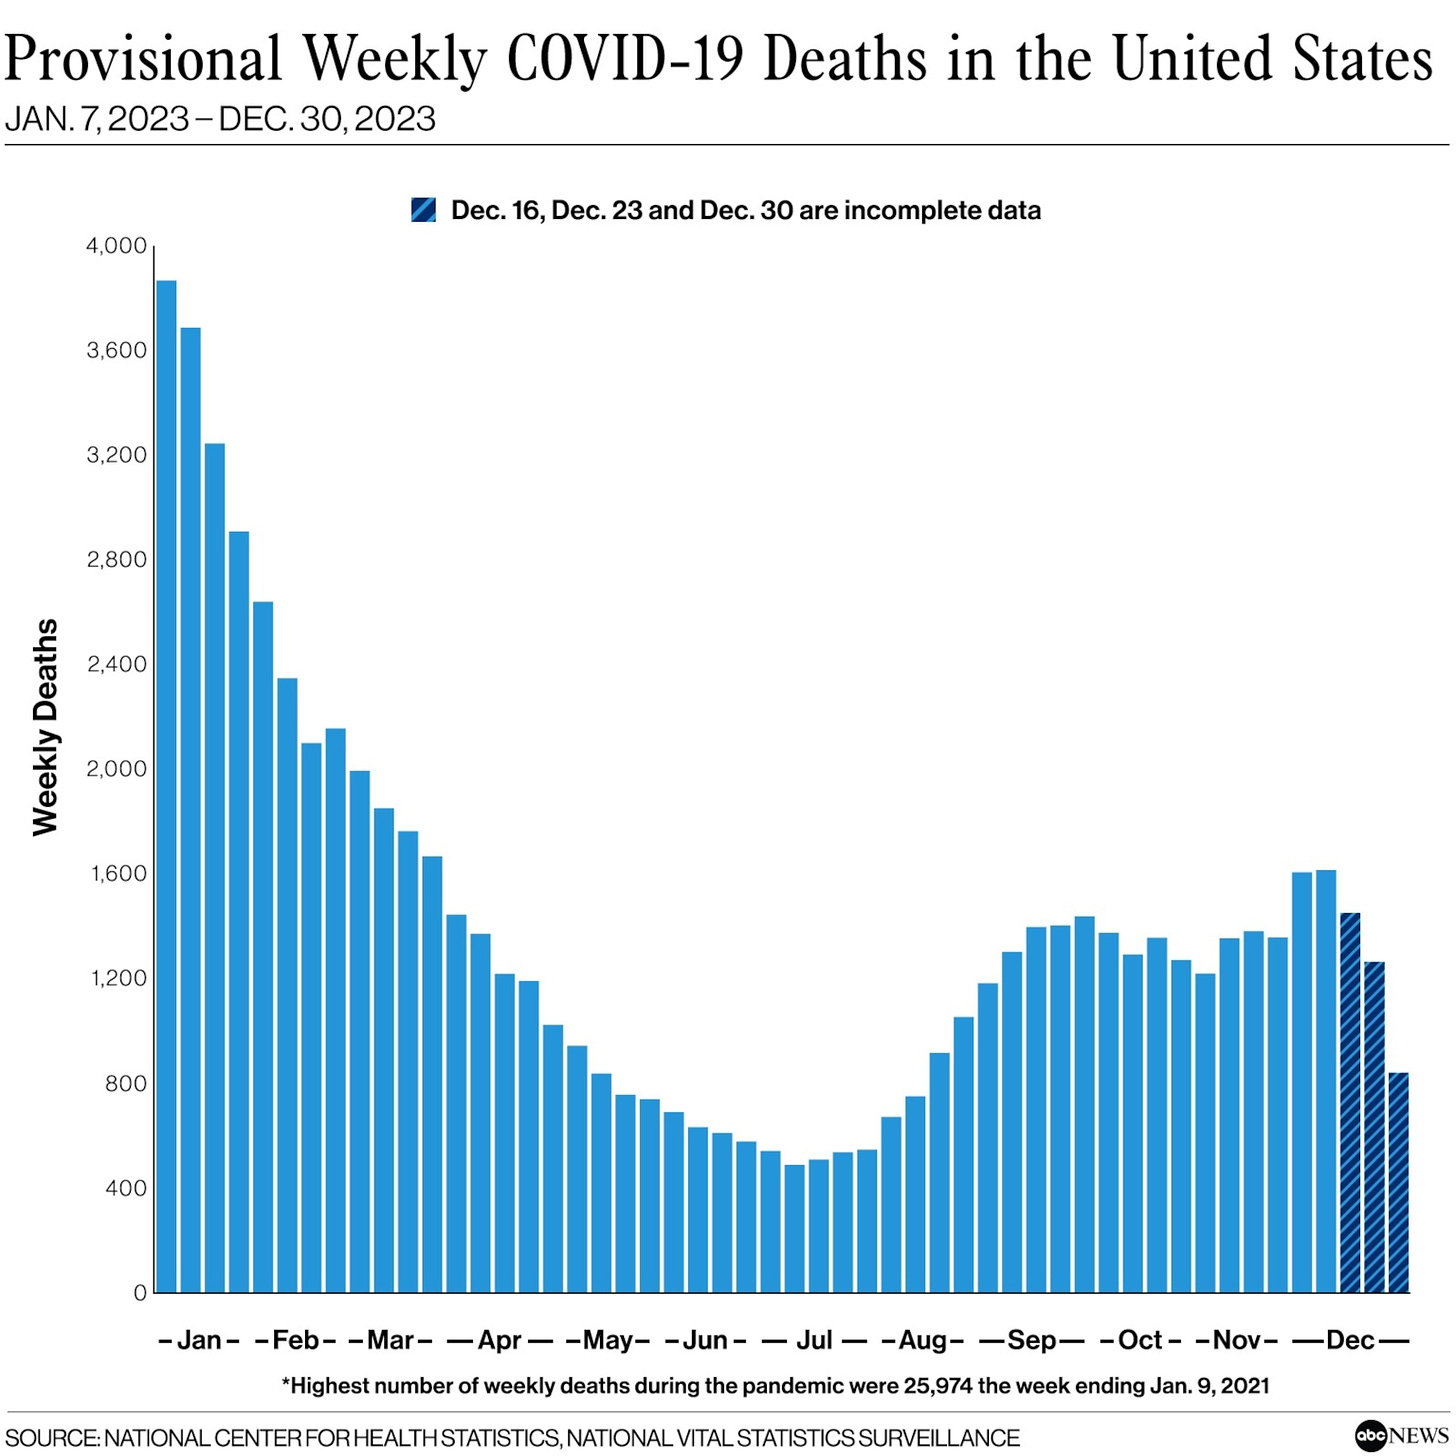 PHOTO: Provisional Weekly COVID-19 Deaths in the United States- Jan. 7, 2023 – Dec. 30, 2023